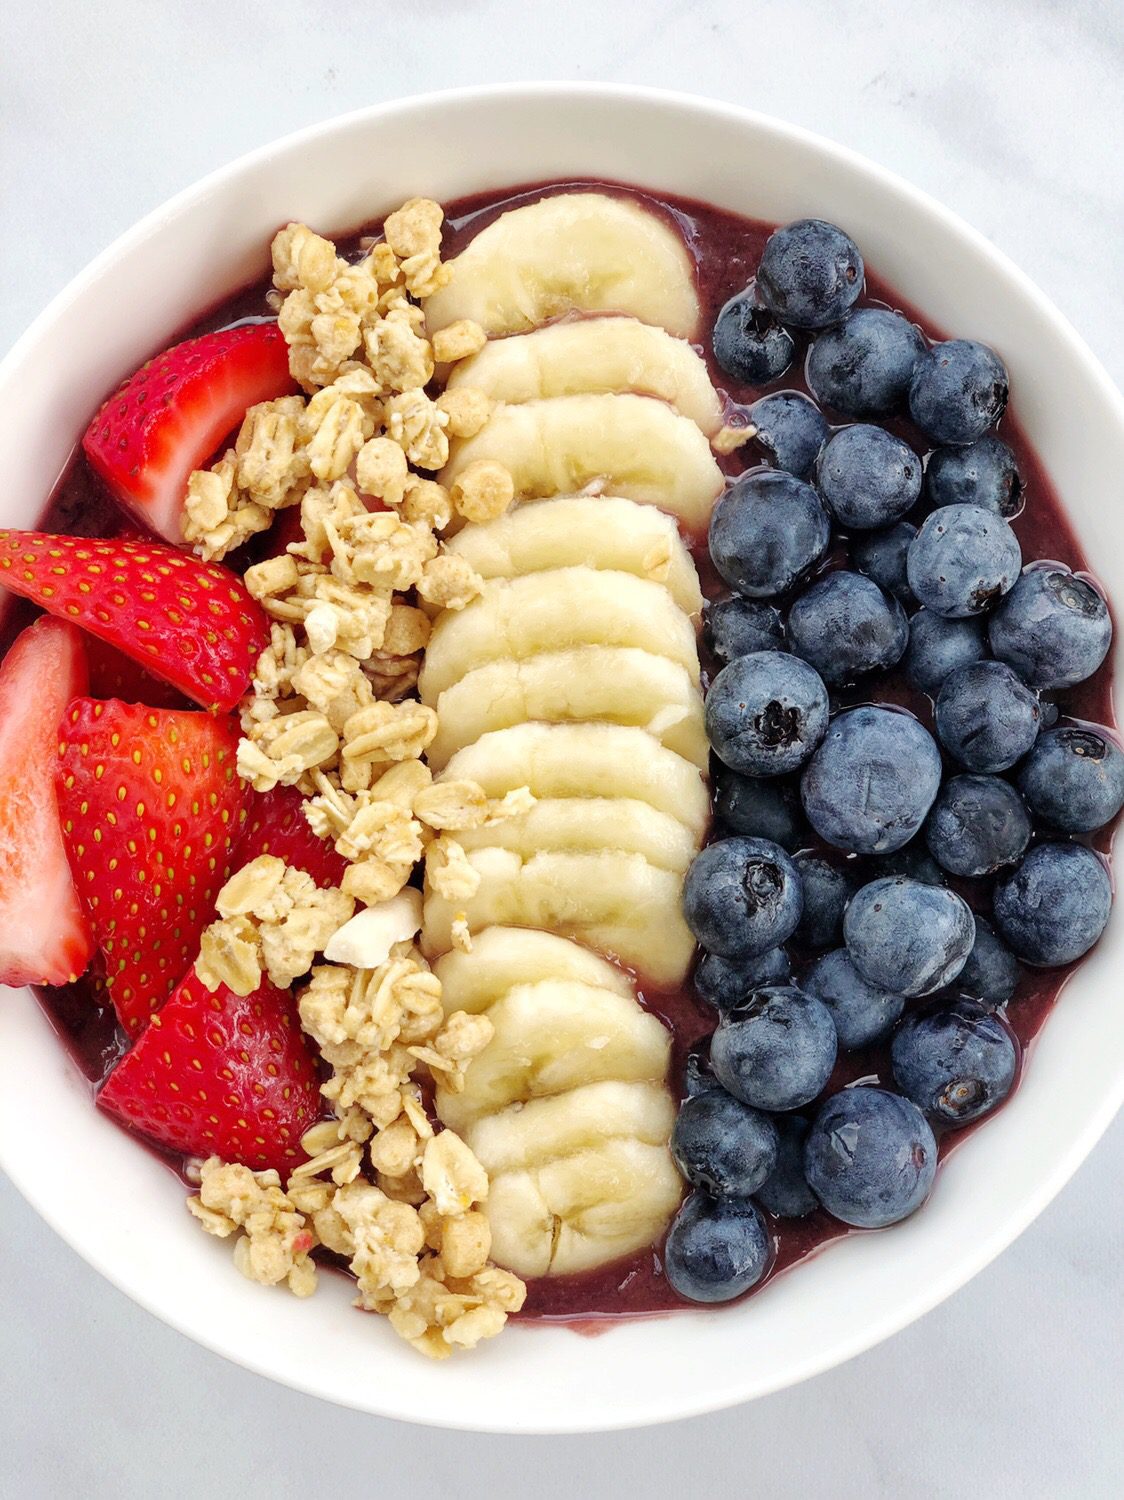 Quick, easy, plant-based, naturally sweetened, and wholesome. Here's everything you need to know about how to make an acai bowl at home!